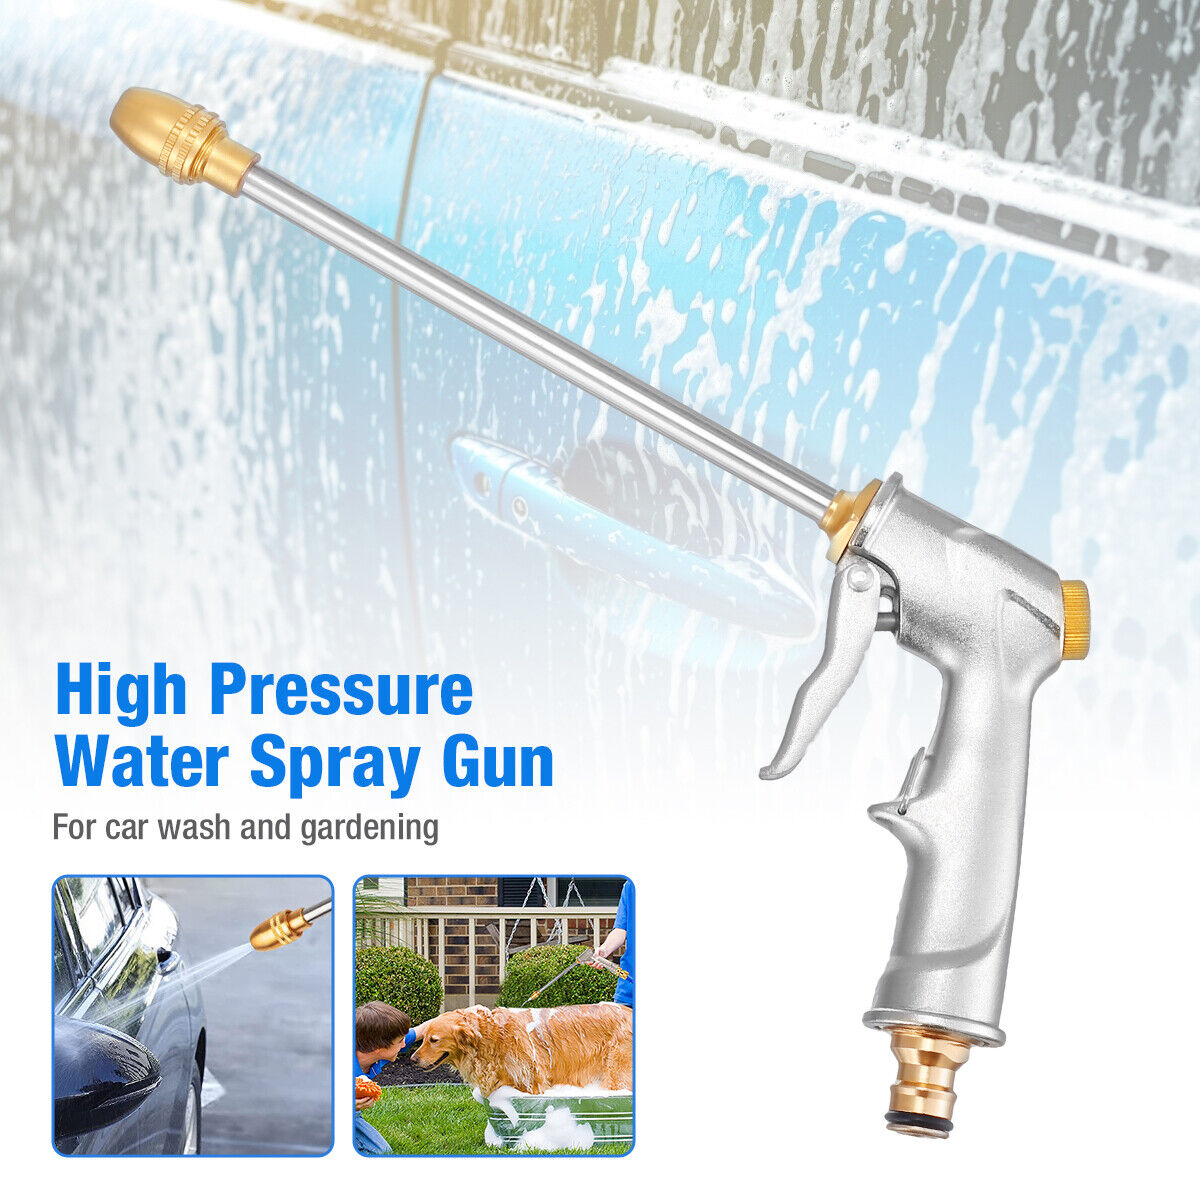 High Pressure Power Gun Water Spray Car Clean Washer Tool Set Garden Hose Nozzle Unbranded Does Not Apply